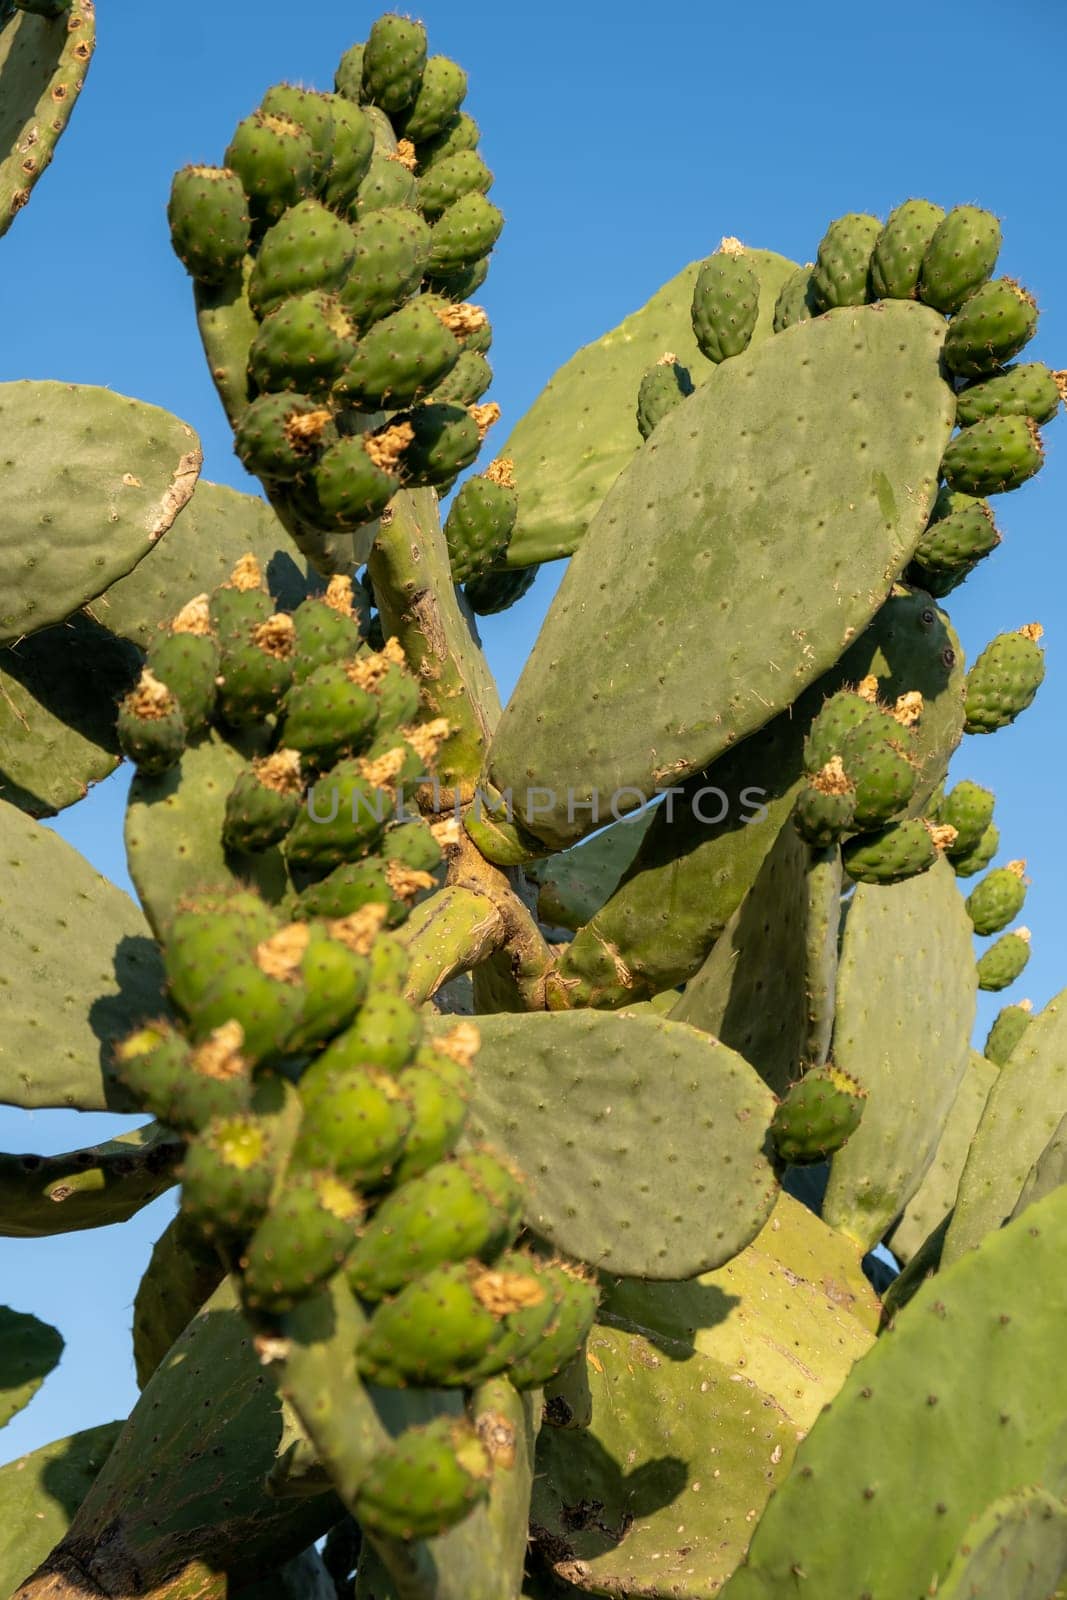 Fresh succulent cactus closeup on blue sky. Green plant cactus with spines and dried flowers. Large green cactus close-up with young shoots.